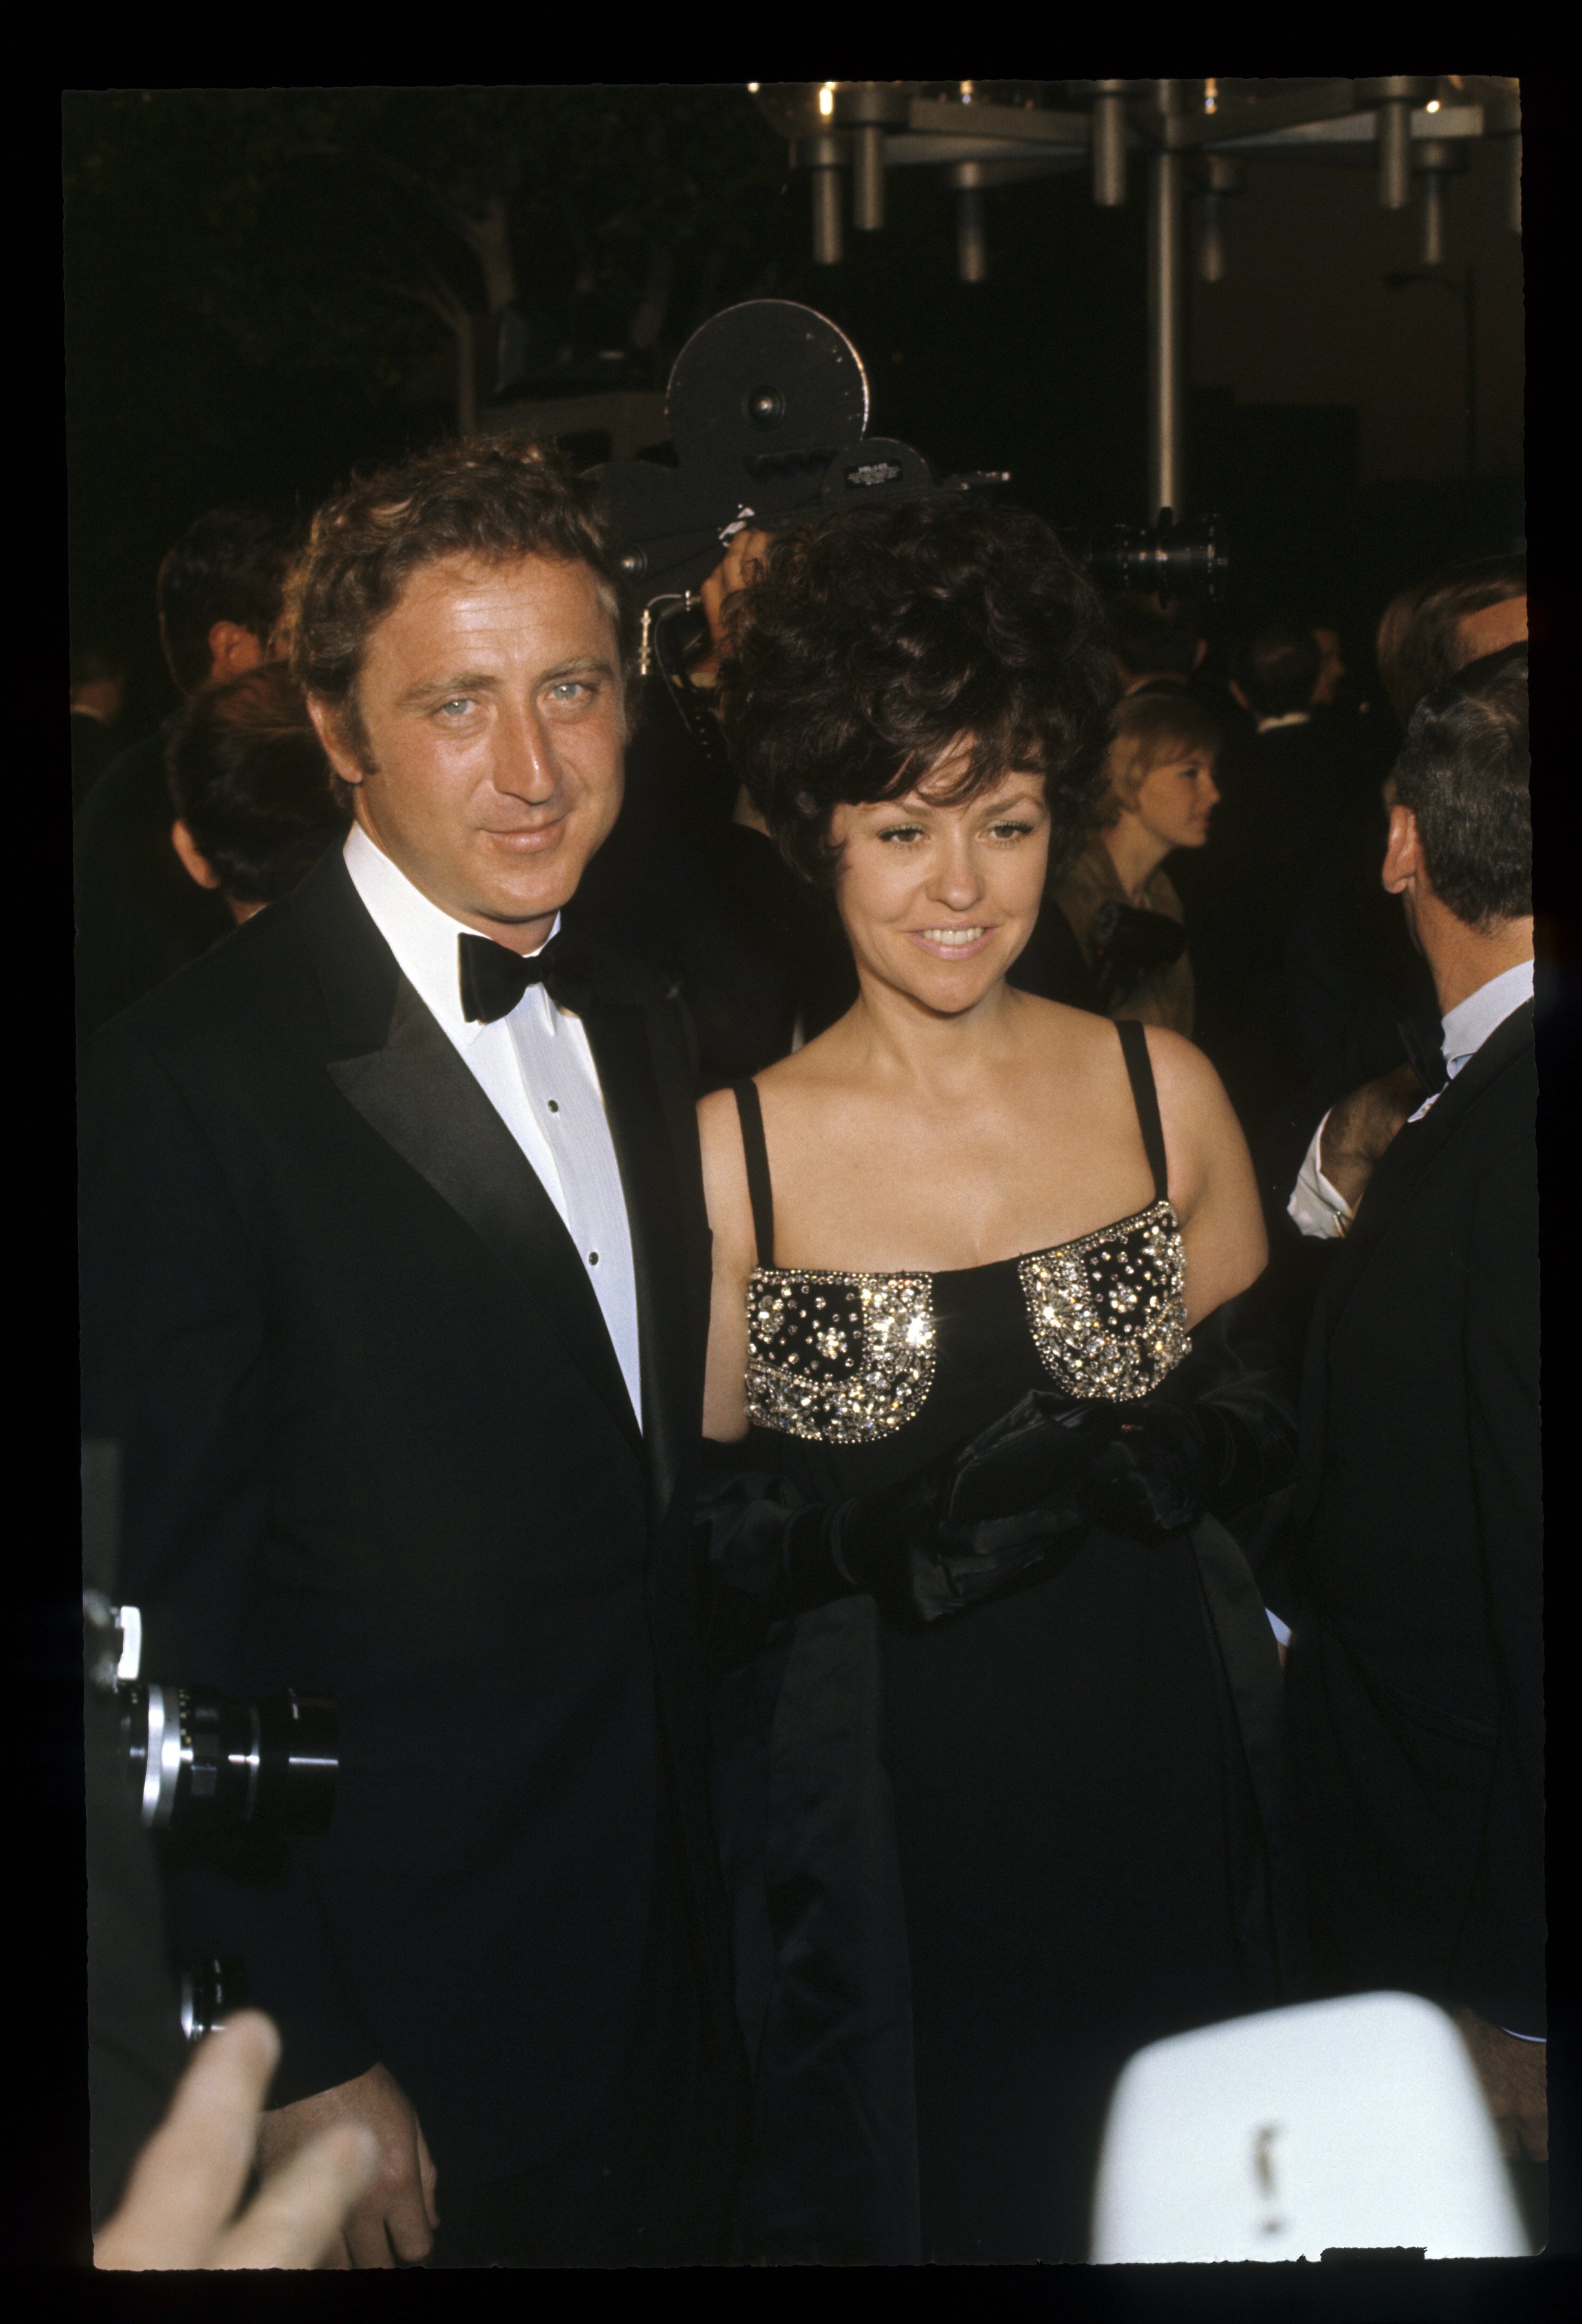 Gene Wilder and Mary Joan Schutz attend the 41st Annual Acadamey Awards on April 14, 1969, in Dorothy Chandler Pavilion, Los Angeles. | Source: Getty Images